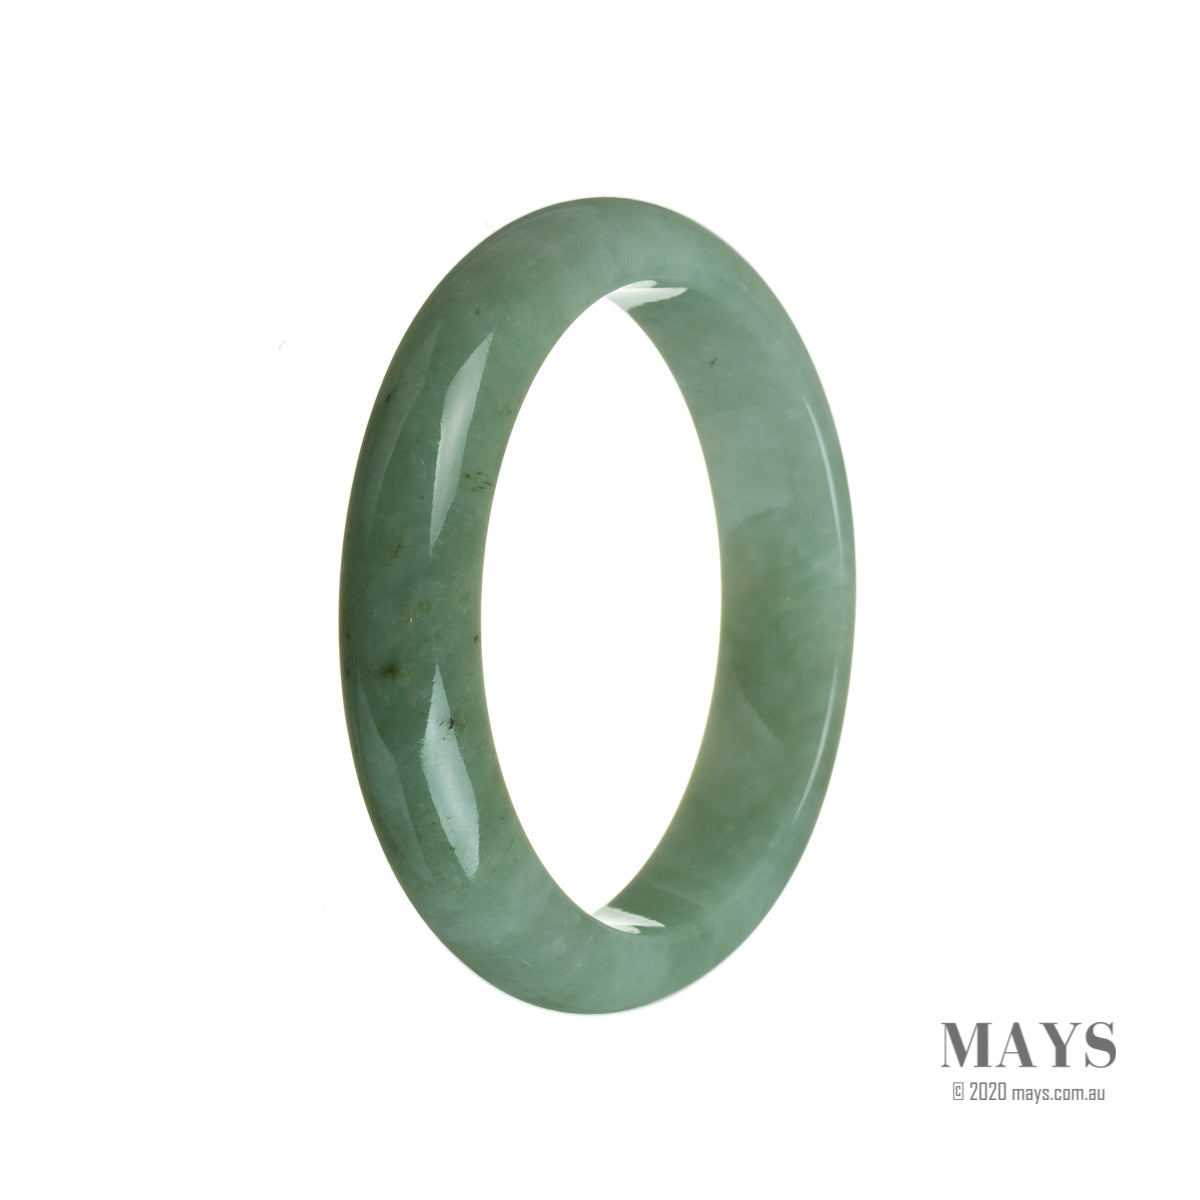 A high-quality green jadeite bangle with a semi-round shape, measuring 58mm in diameter.